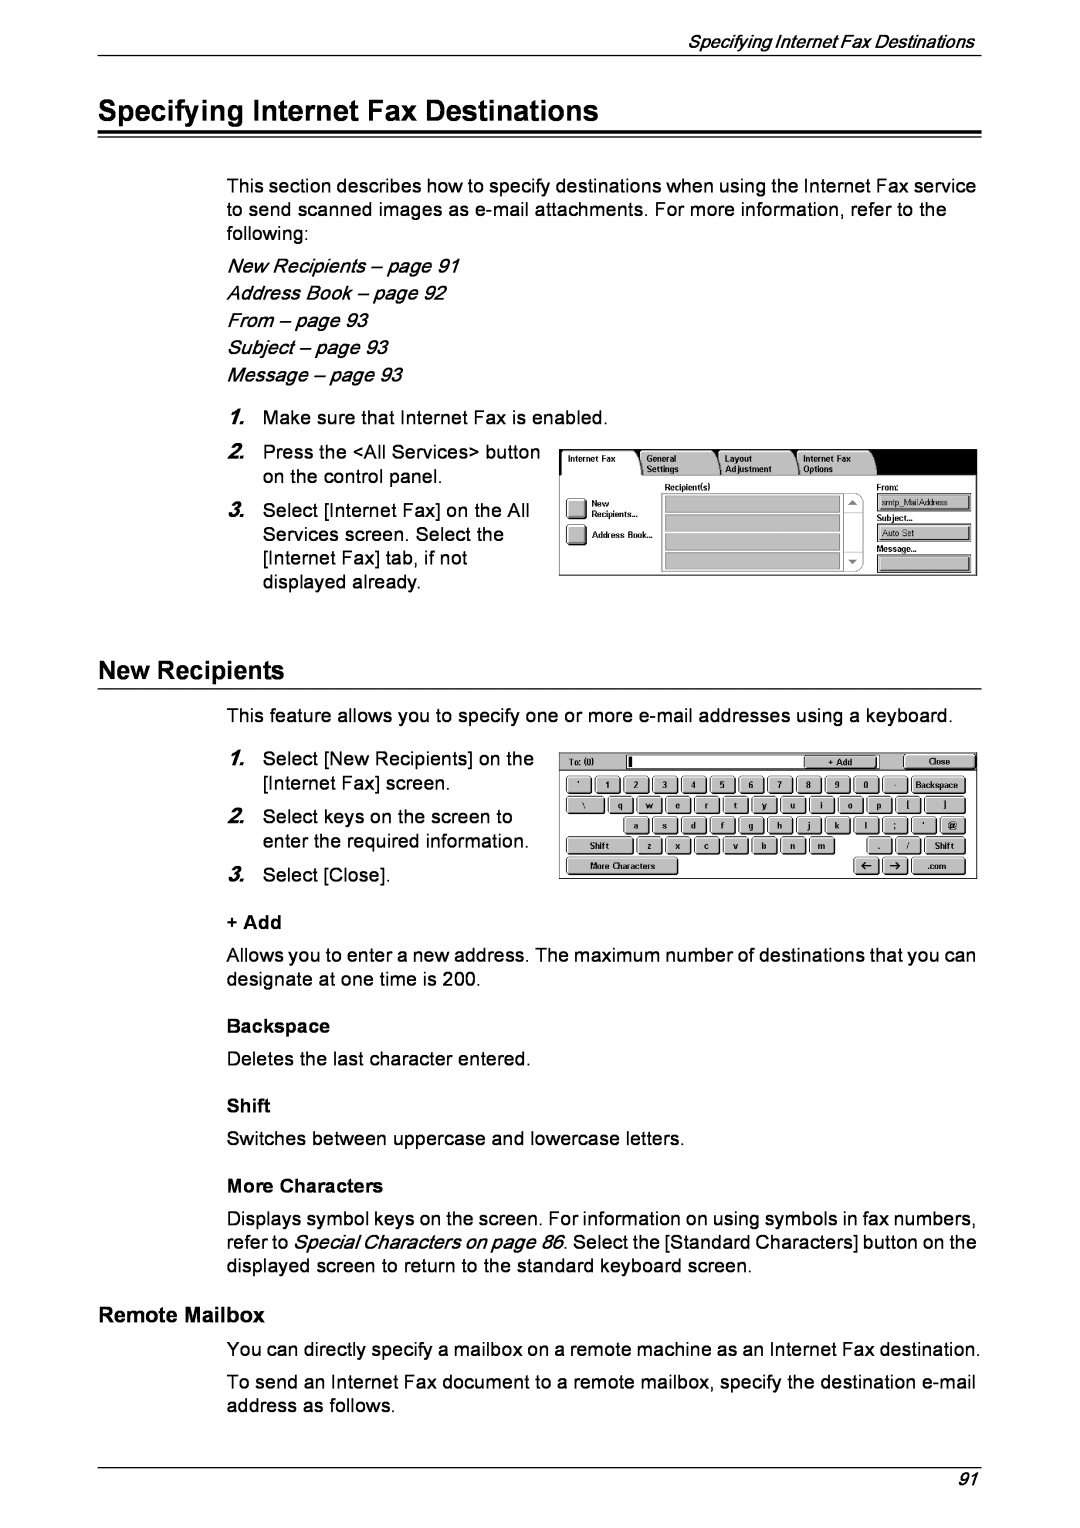 Xerox 5230 Specifying Internet Fax Destinations, Remote Mailbox, From – page Subject – page Message – page, New Recipients 